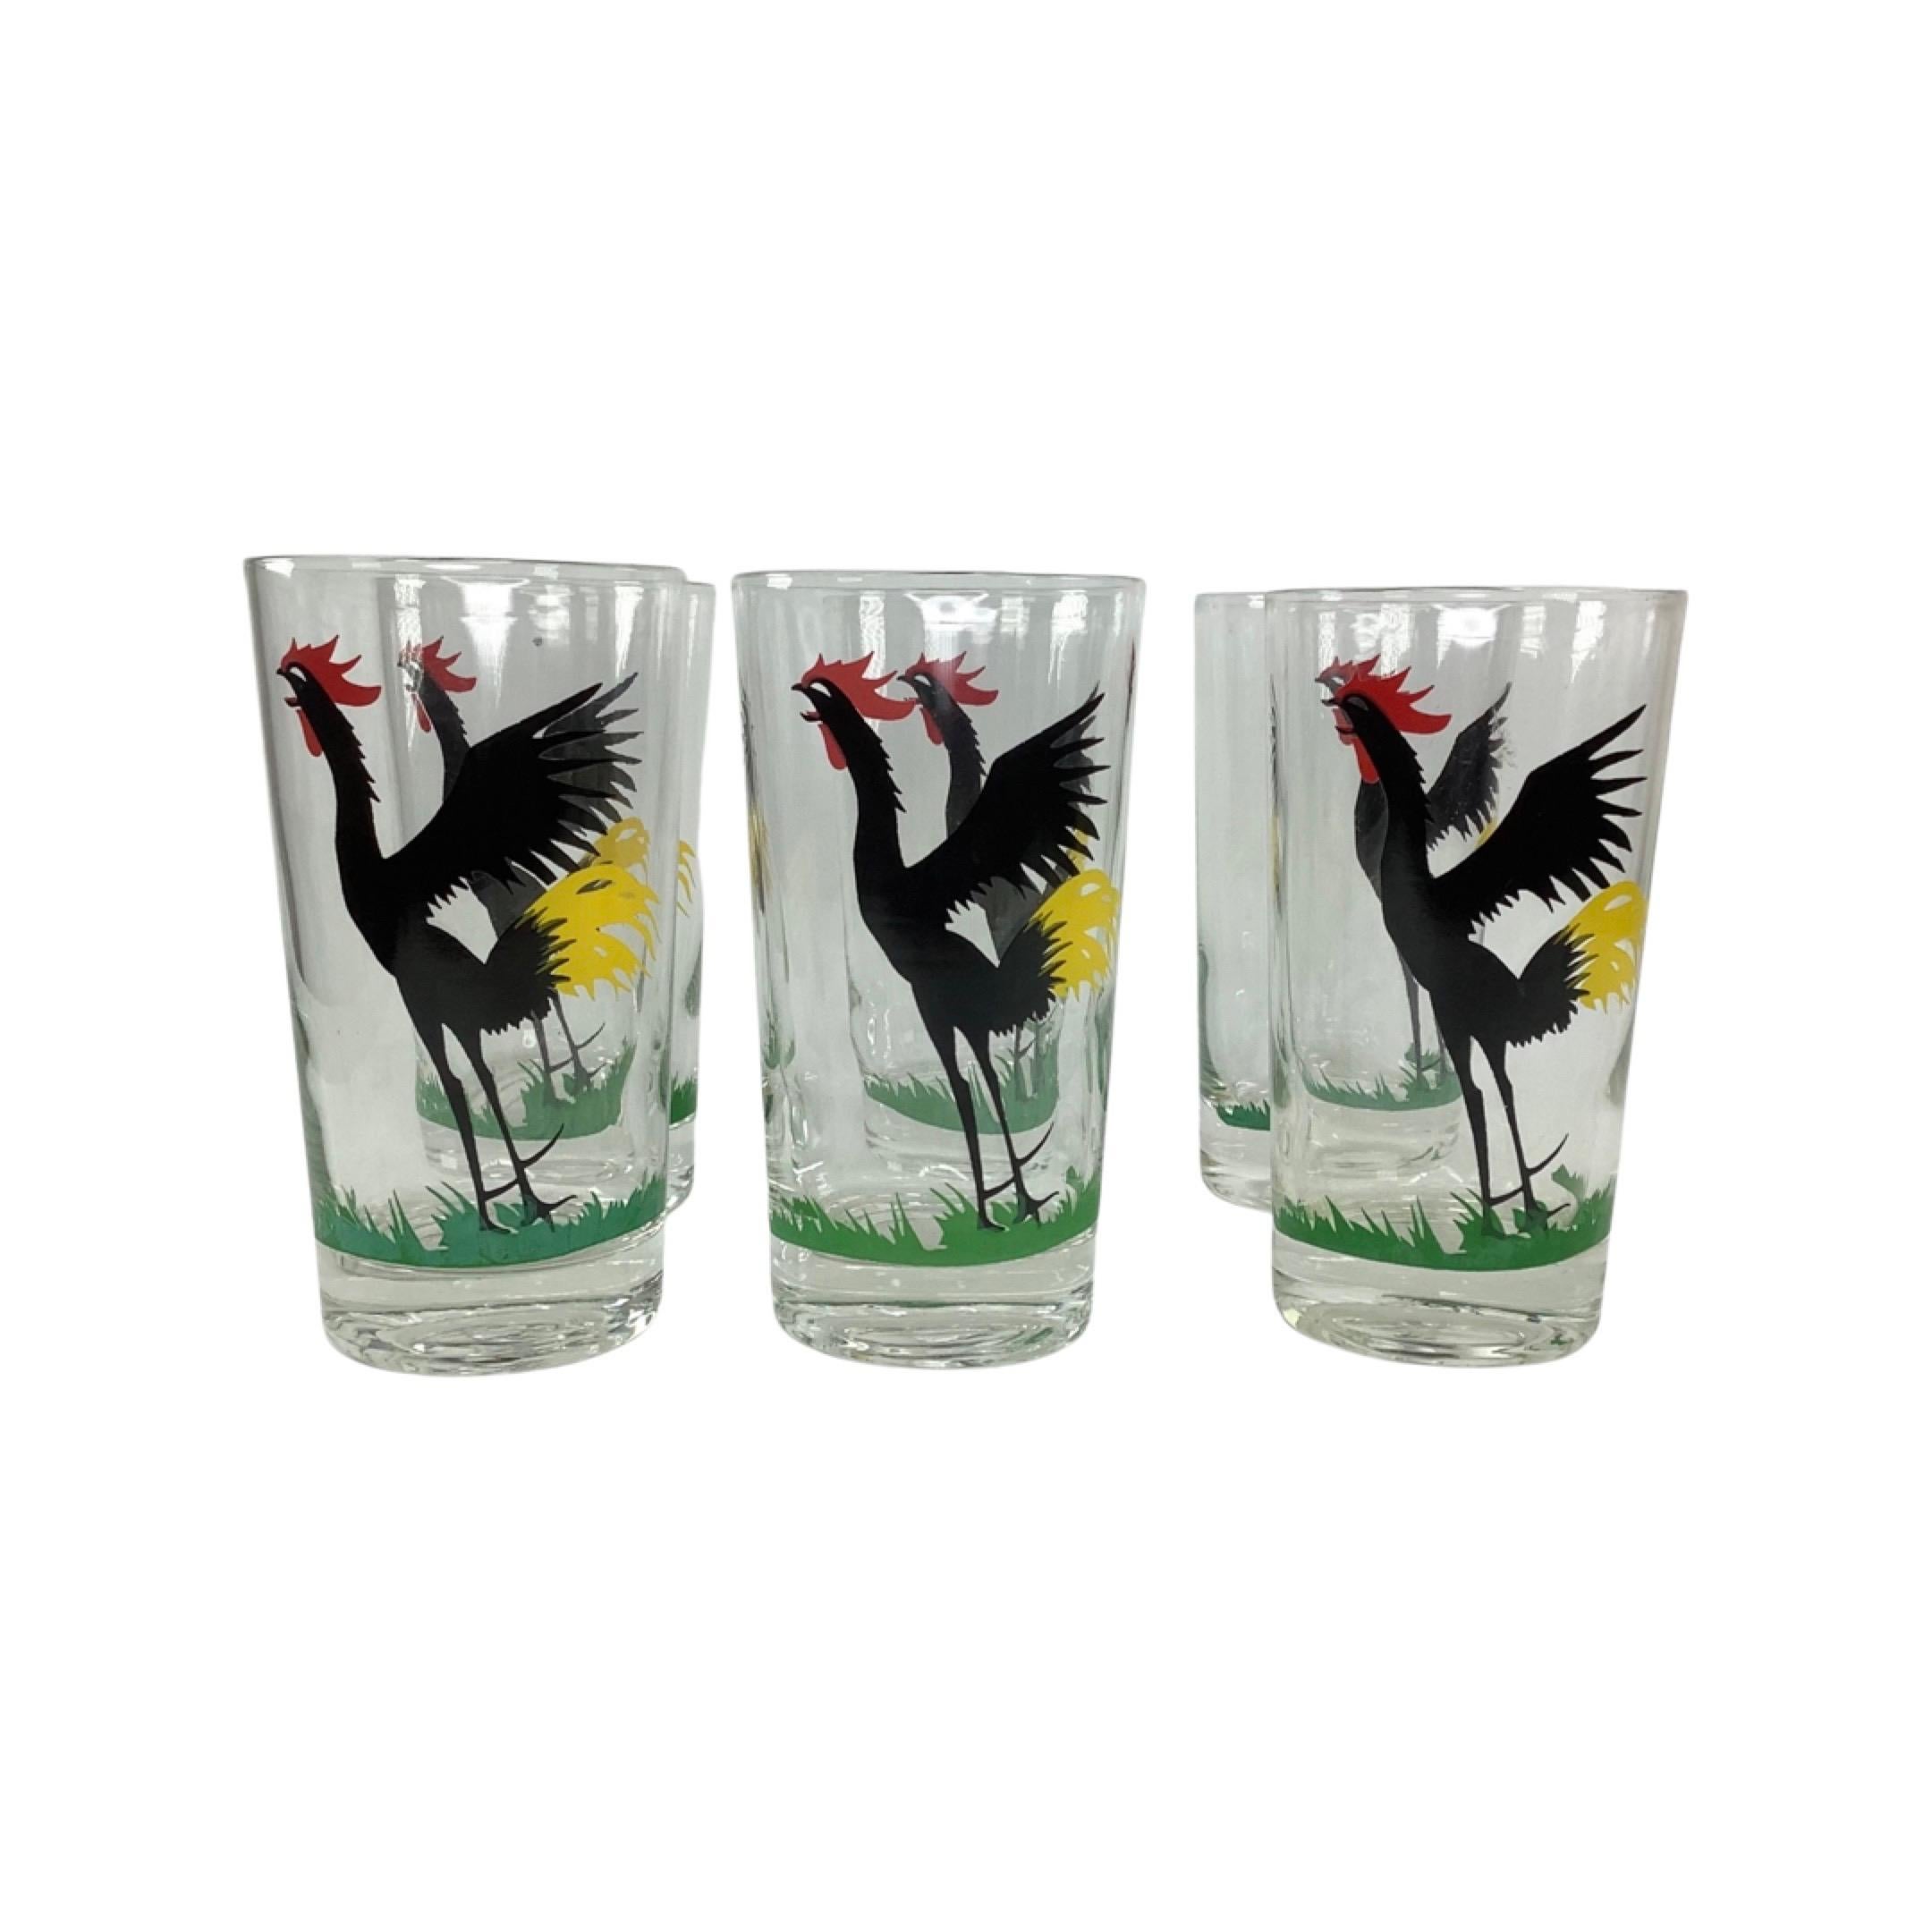 Set Of 6 Crowing Rooster Highball Cocktail Glasses. Each glass decorated with a large black crowing rooster with red combs and yellow tail feather standing in green vegetation.
